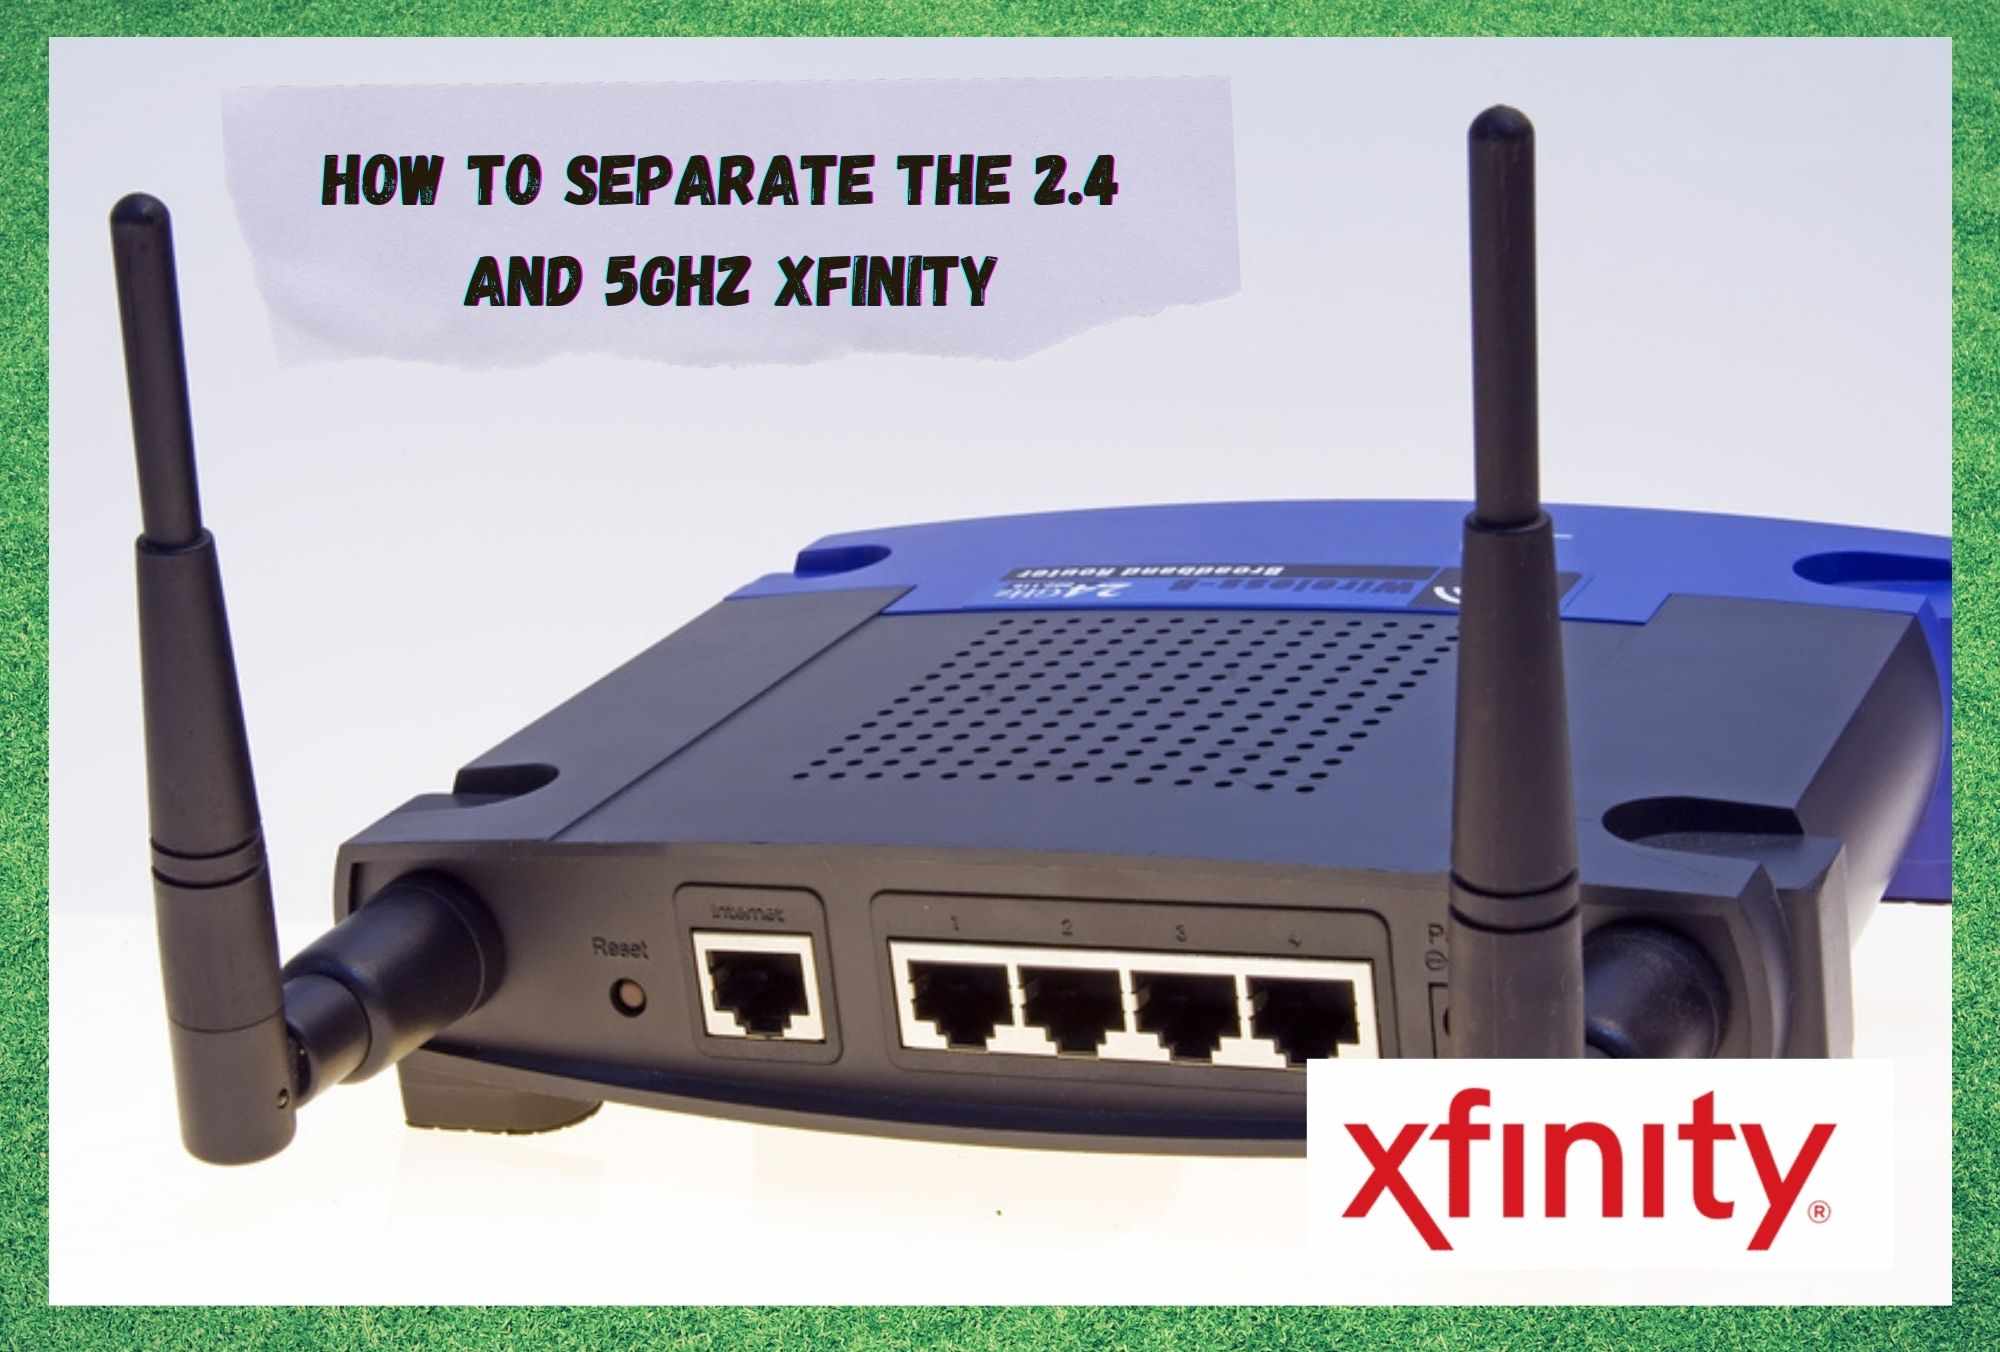 how to separate 2.4 and 5ghz xfinity